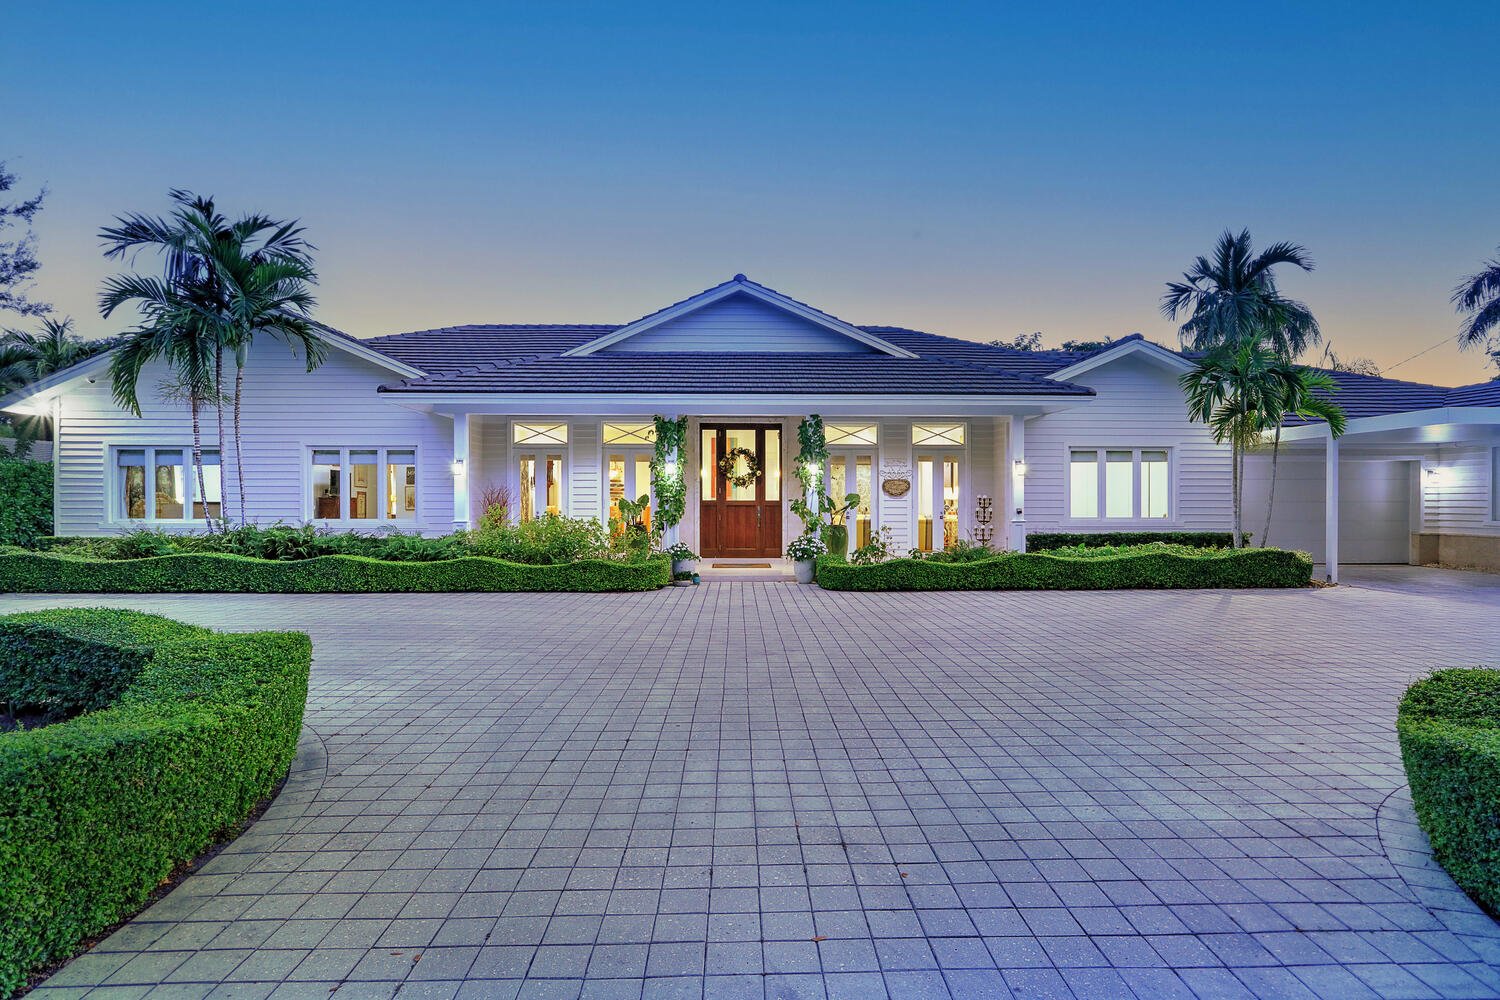 Master Brokers Forum Listing: Check Out This 'Hamptons Meets Key West' Style North Pinecrest Home Asking $5.8 Million 21.jpg